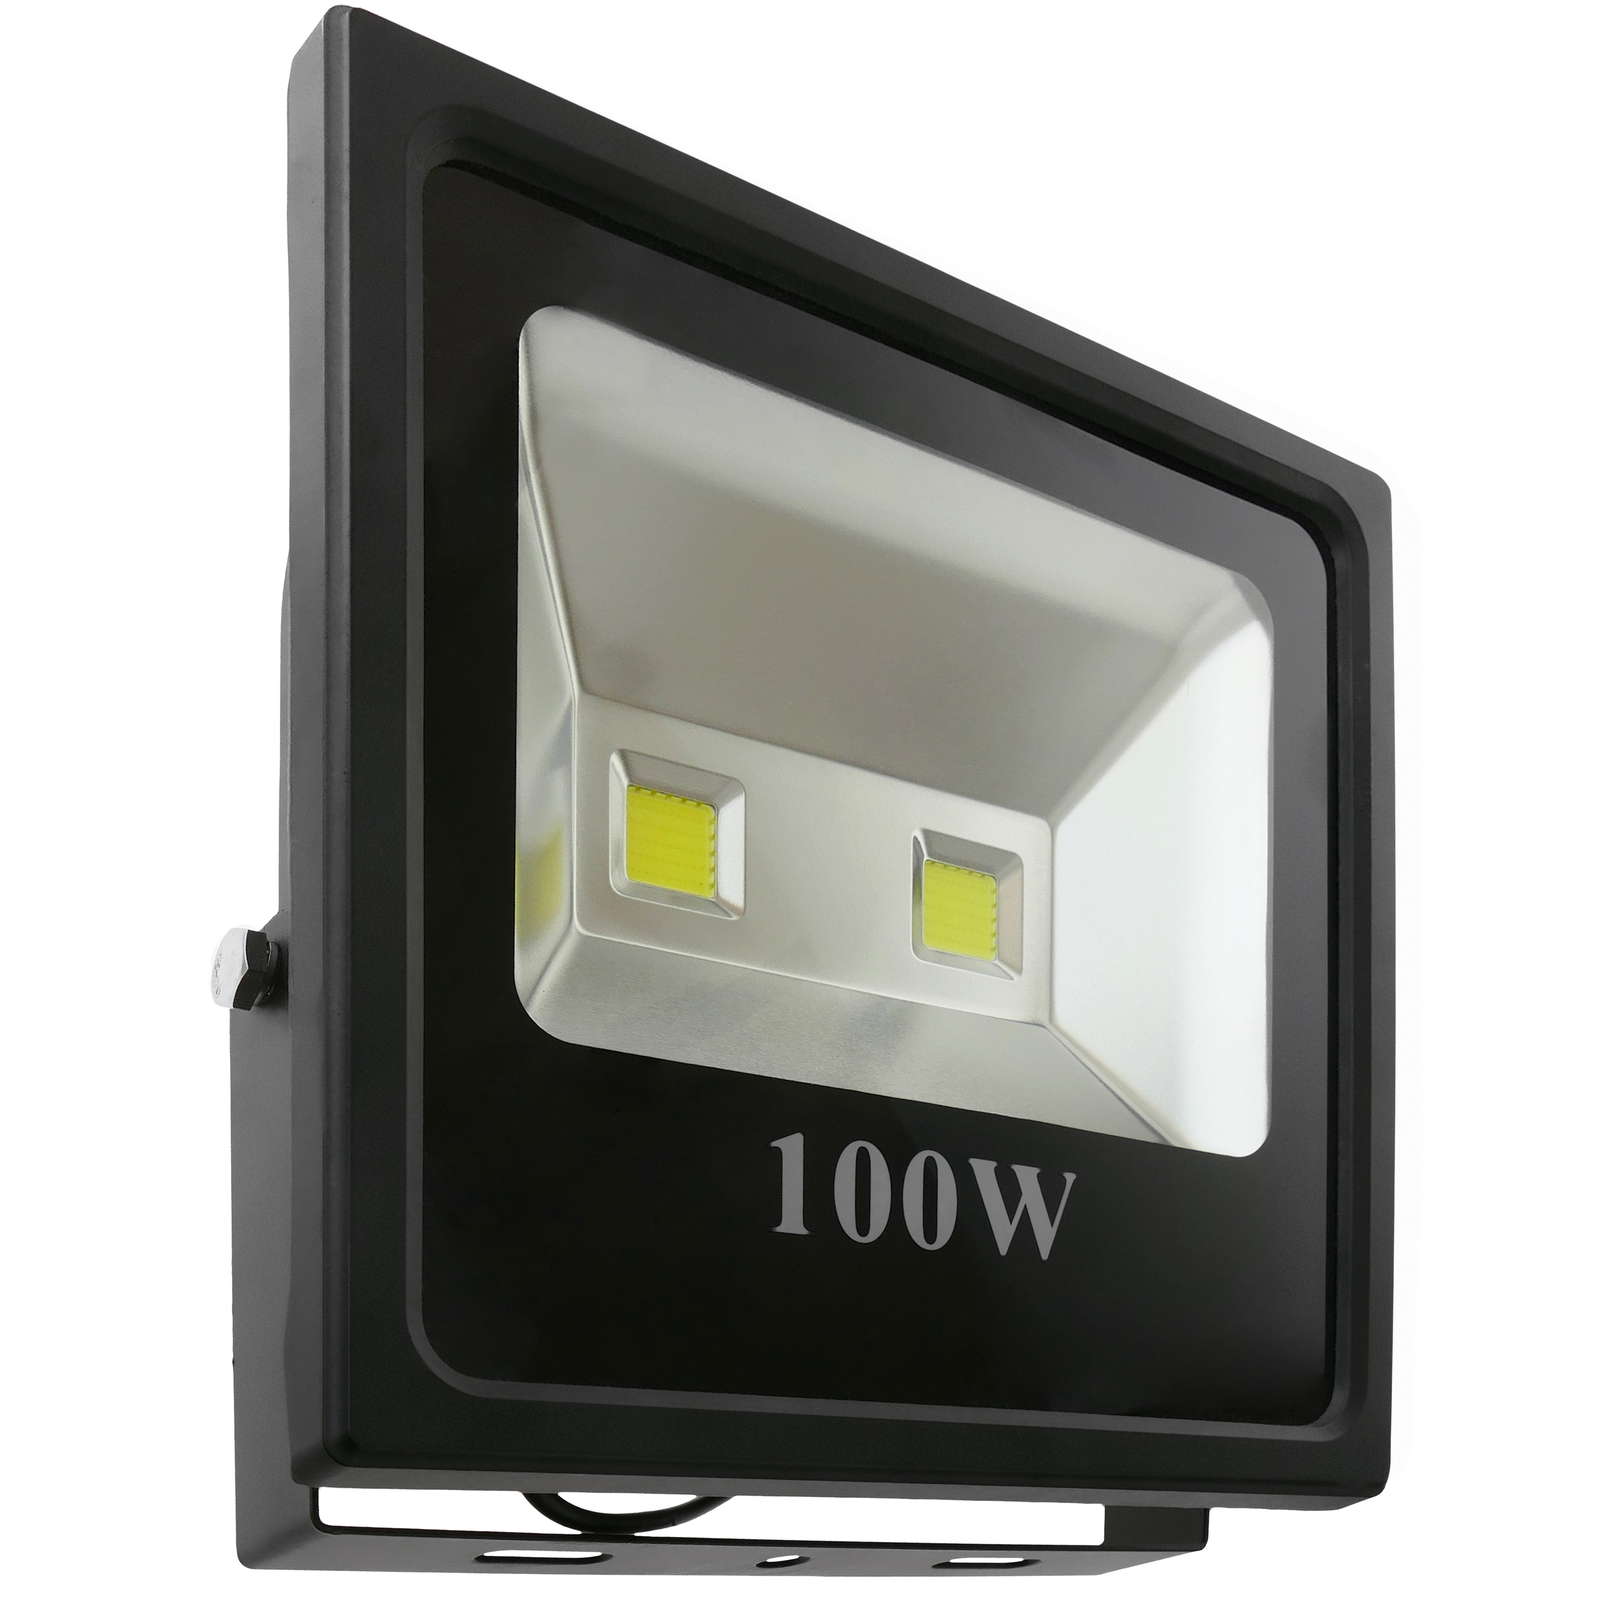 LED spot light IP66 100W 9000LM with adjustable fixation Cablematic